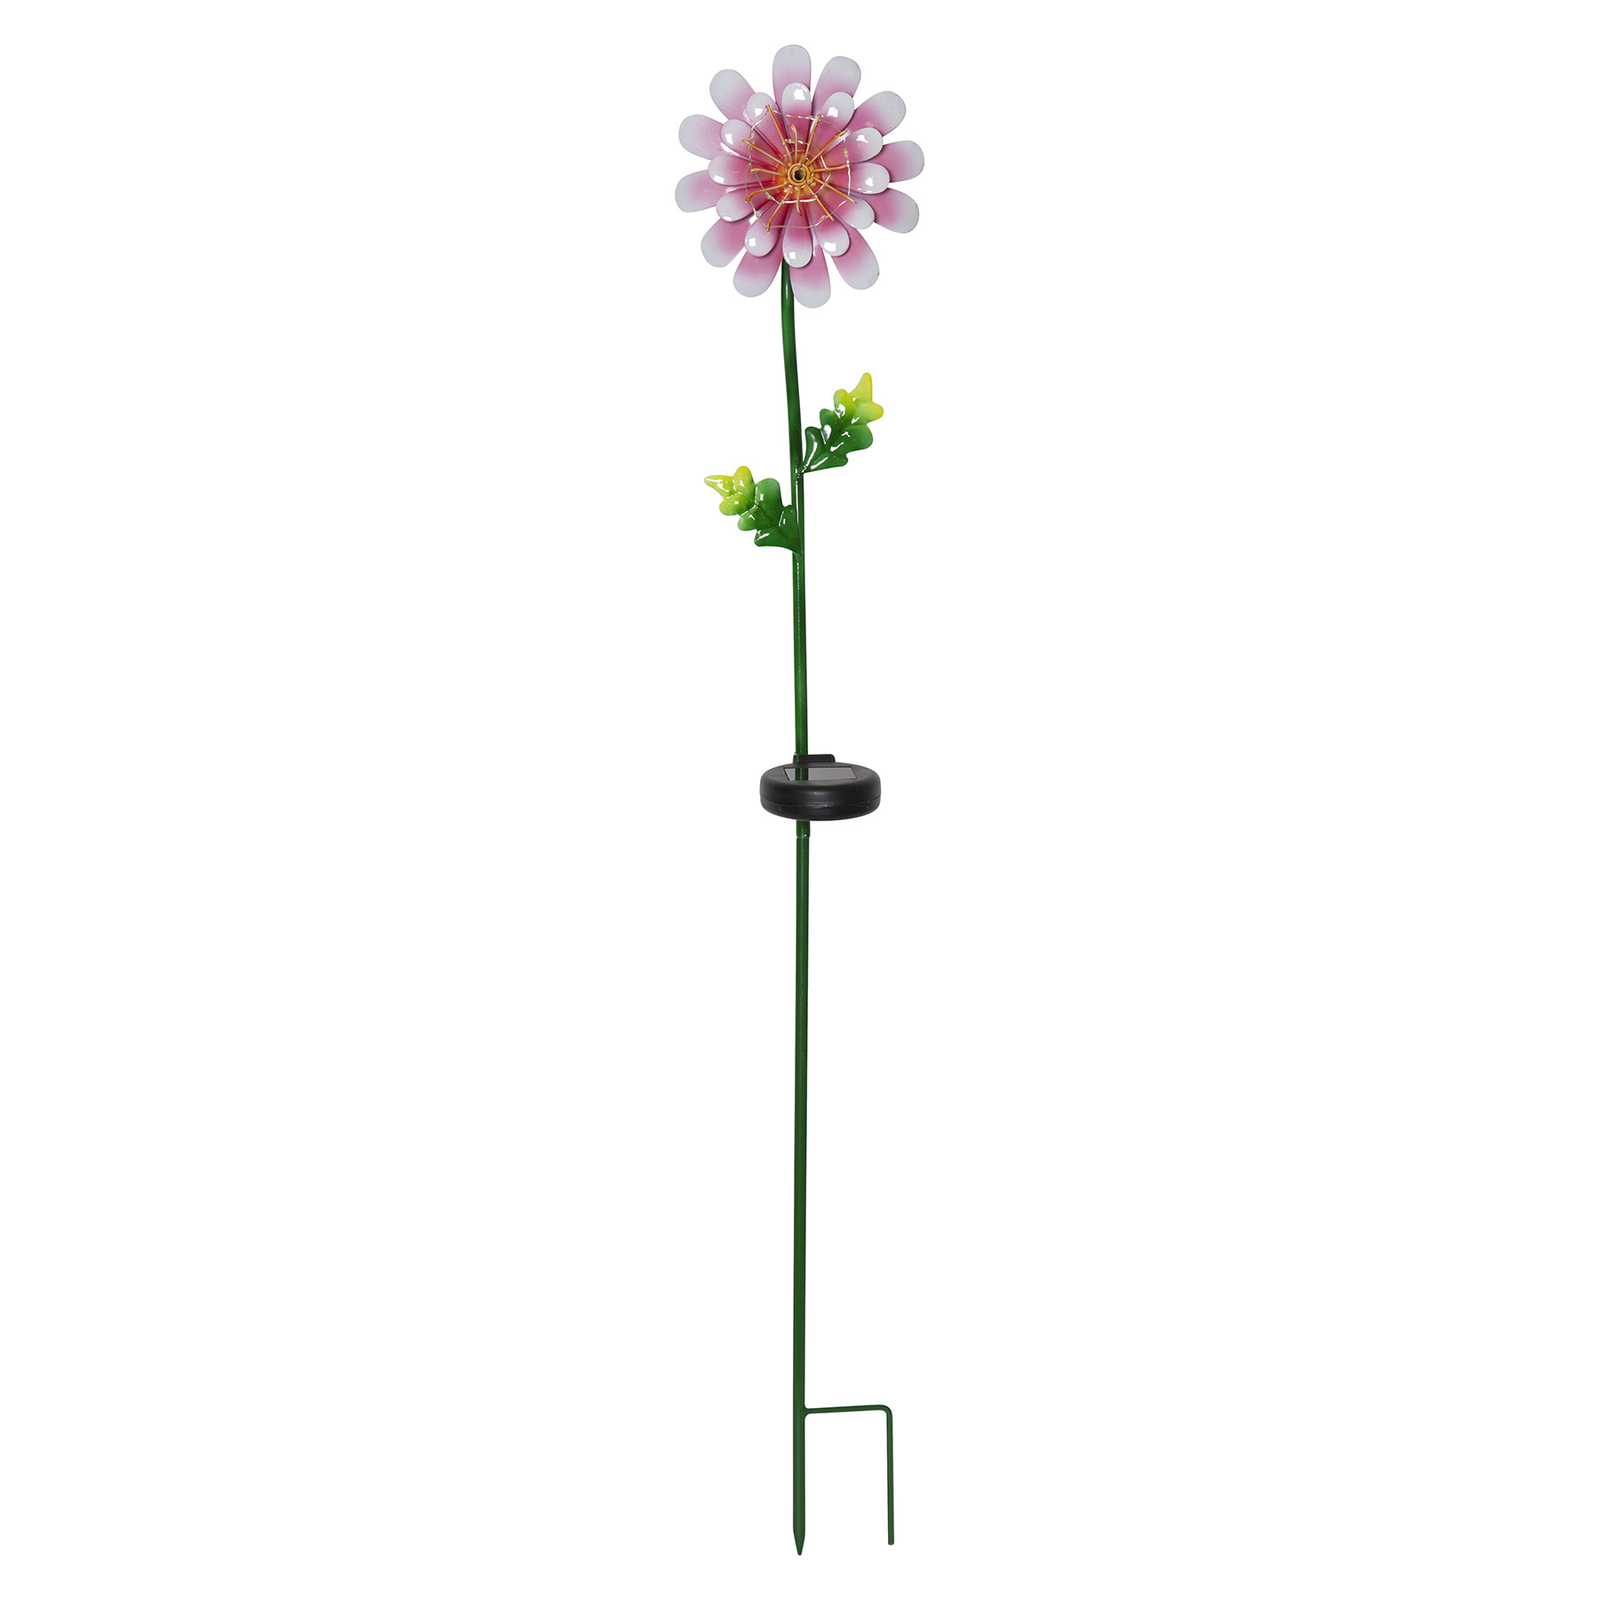 LED-solcellelampe Pink Daisy i blomsterform